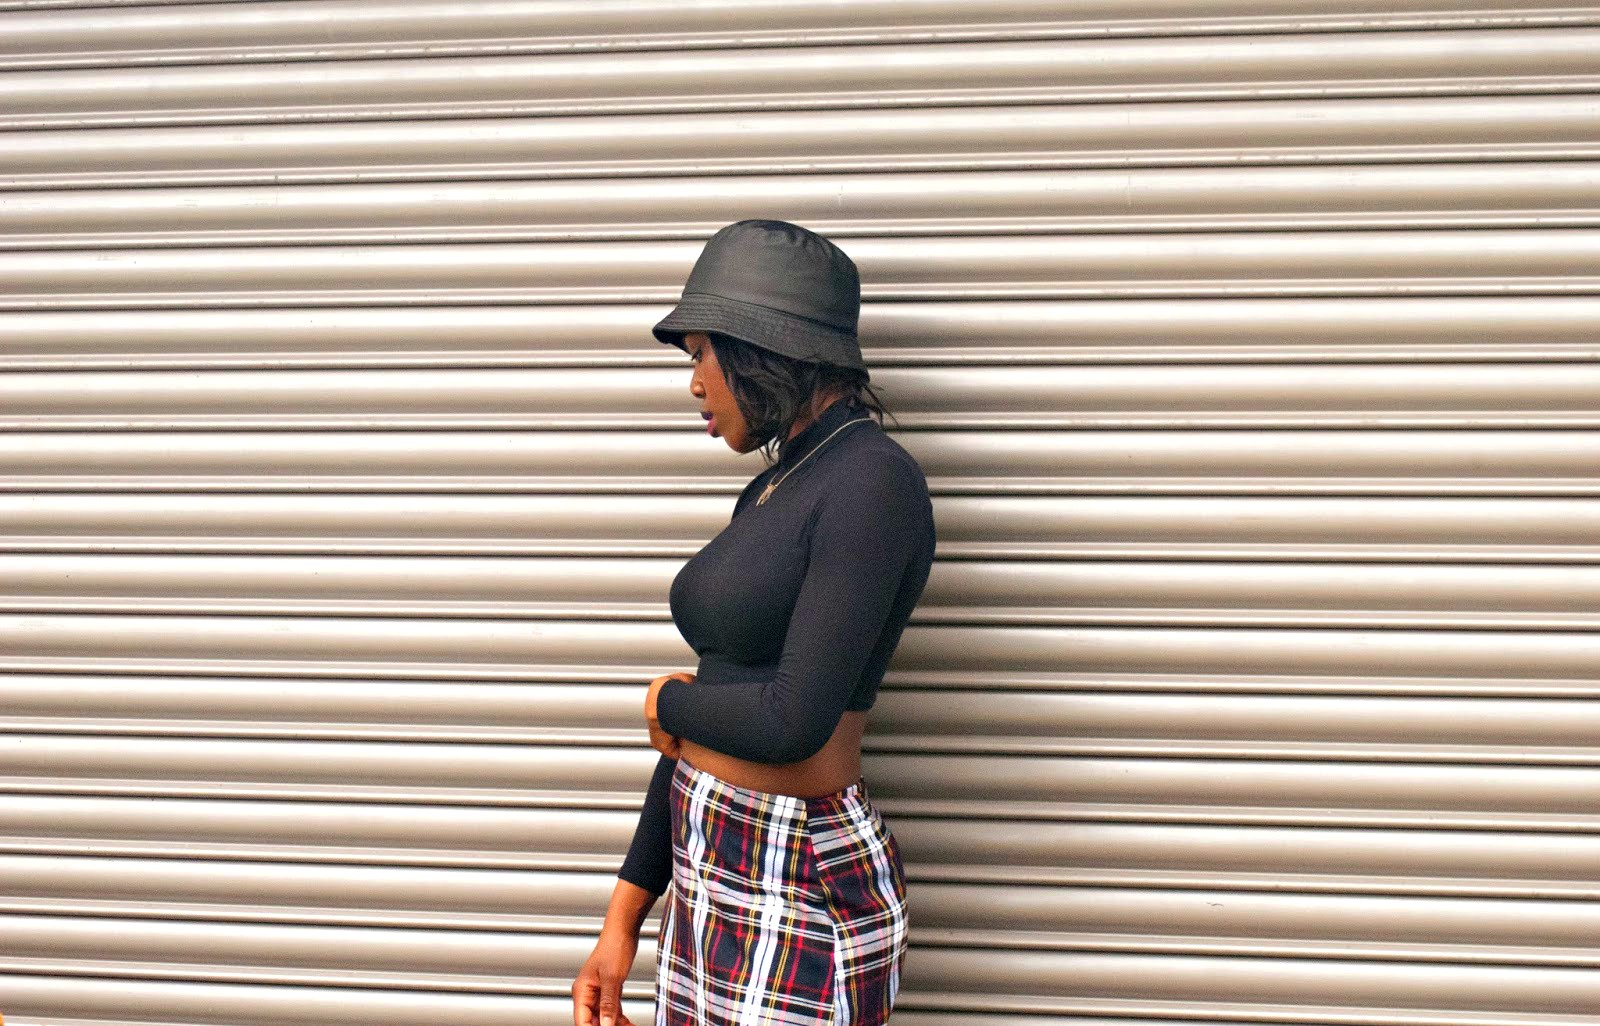 A Preppy 90's Boohoo Revival, Boohoo Skirt, Boohoo plaid skirt, 90's style, 90's fashion, bucket hat, Missguided ribbed crop top, 100 Ways to 30 UK fashion & lifestyle blog, fashion blogger, street style